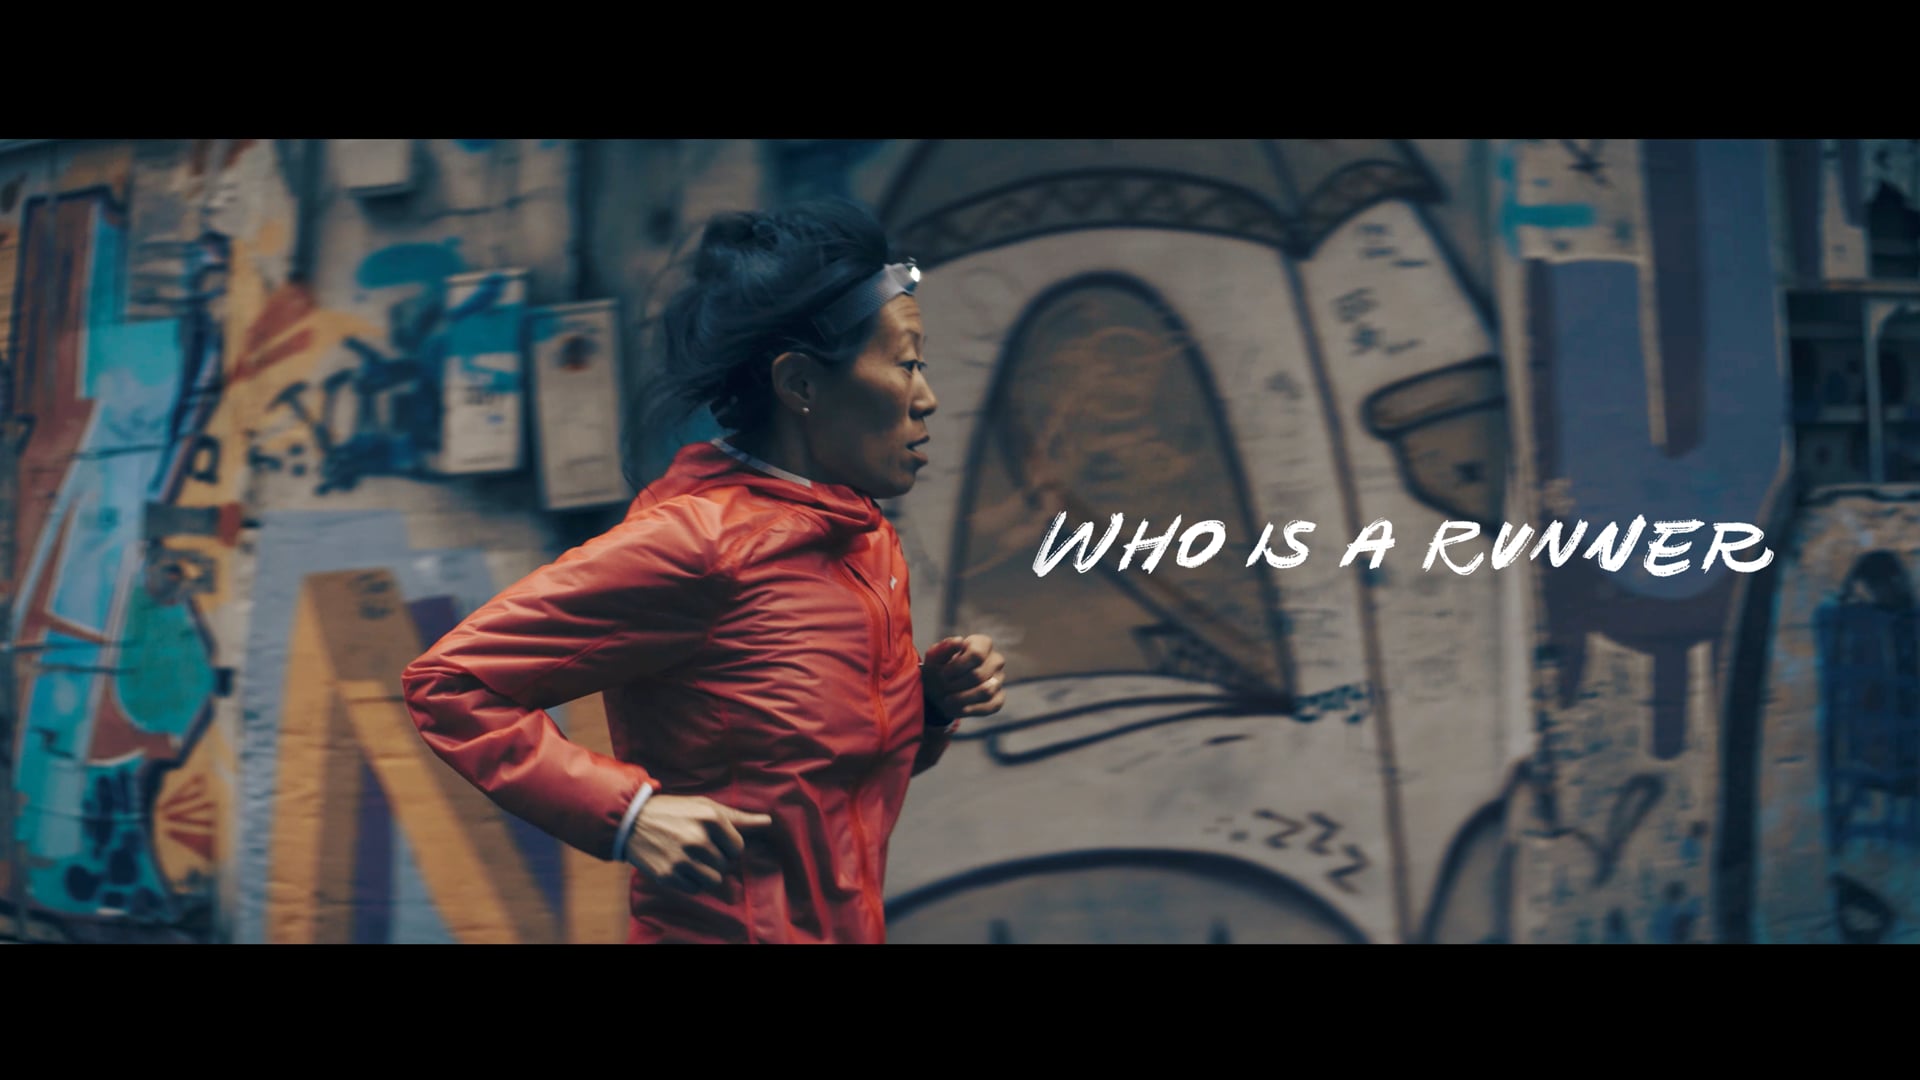 Who Is A Runner | Erin McGrady